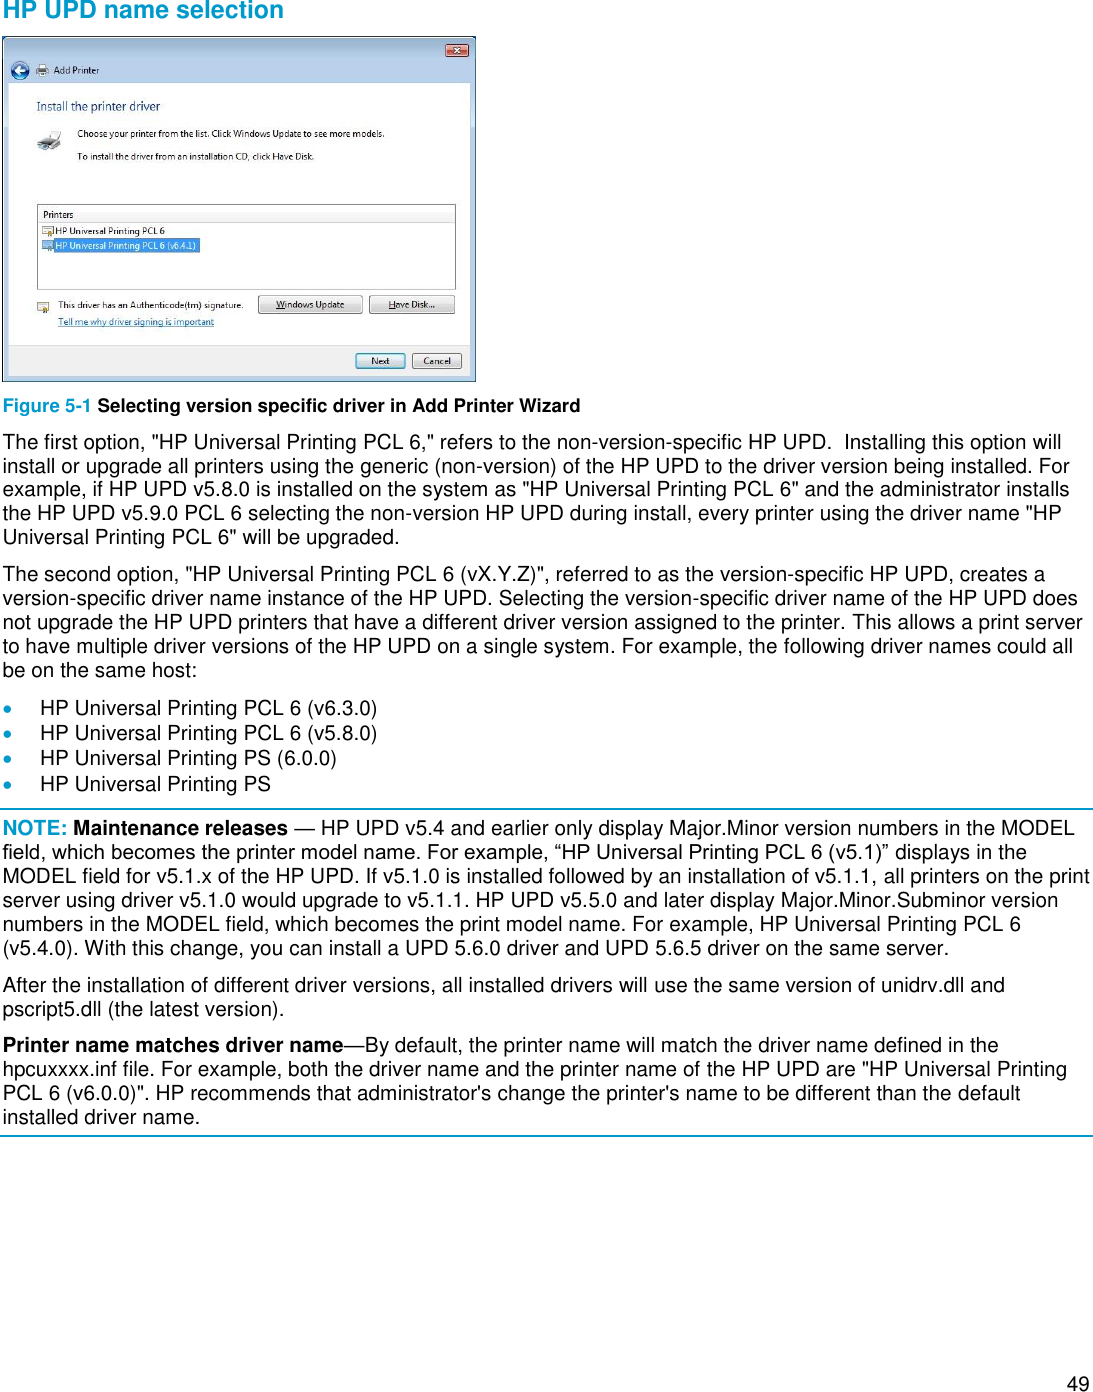 generic ieee 1284.4 printing support driver hp